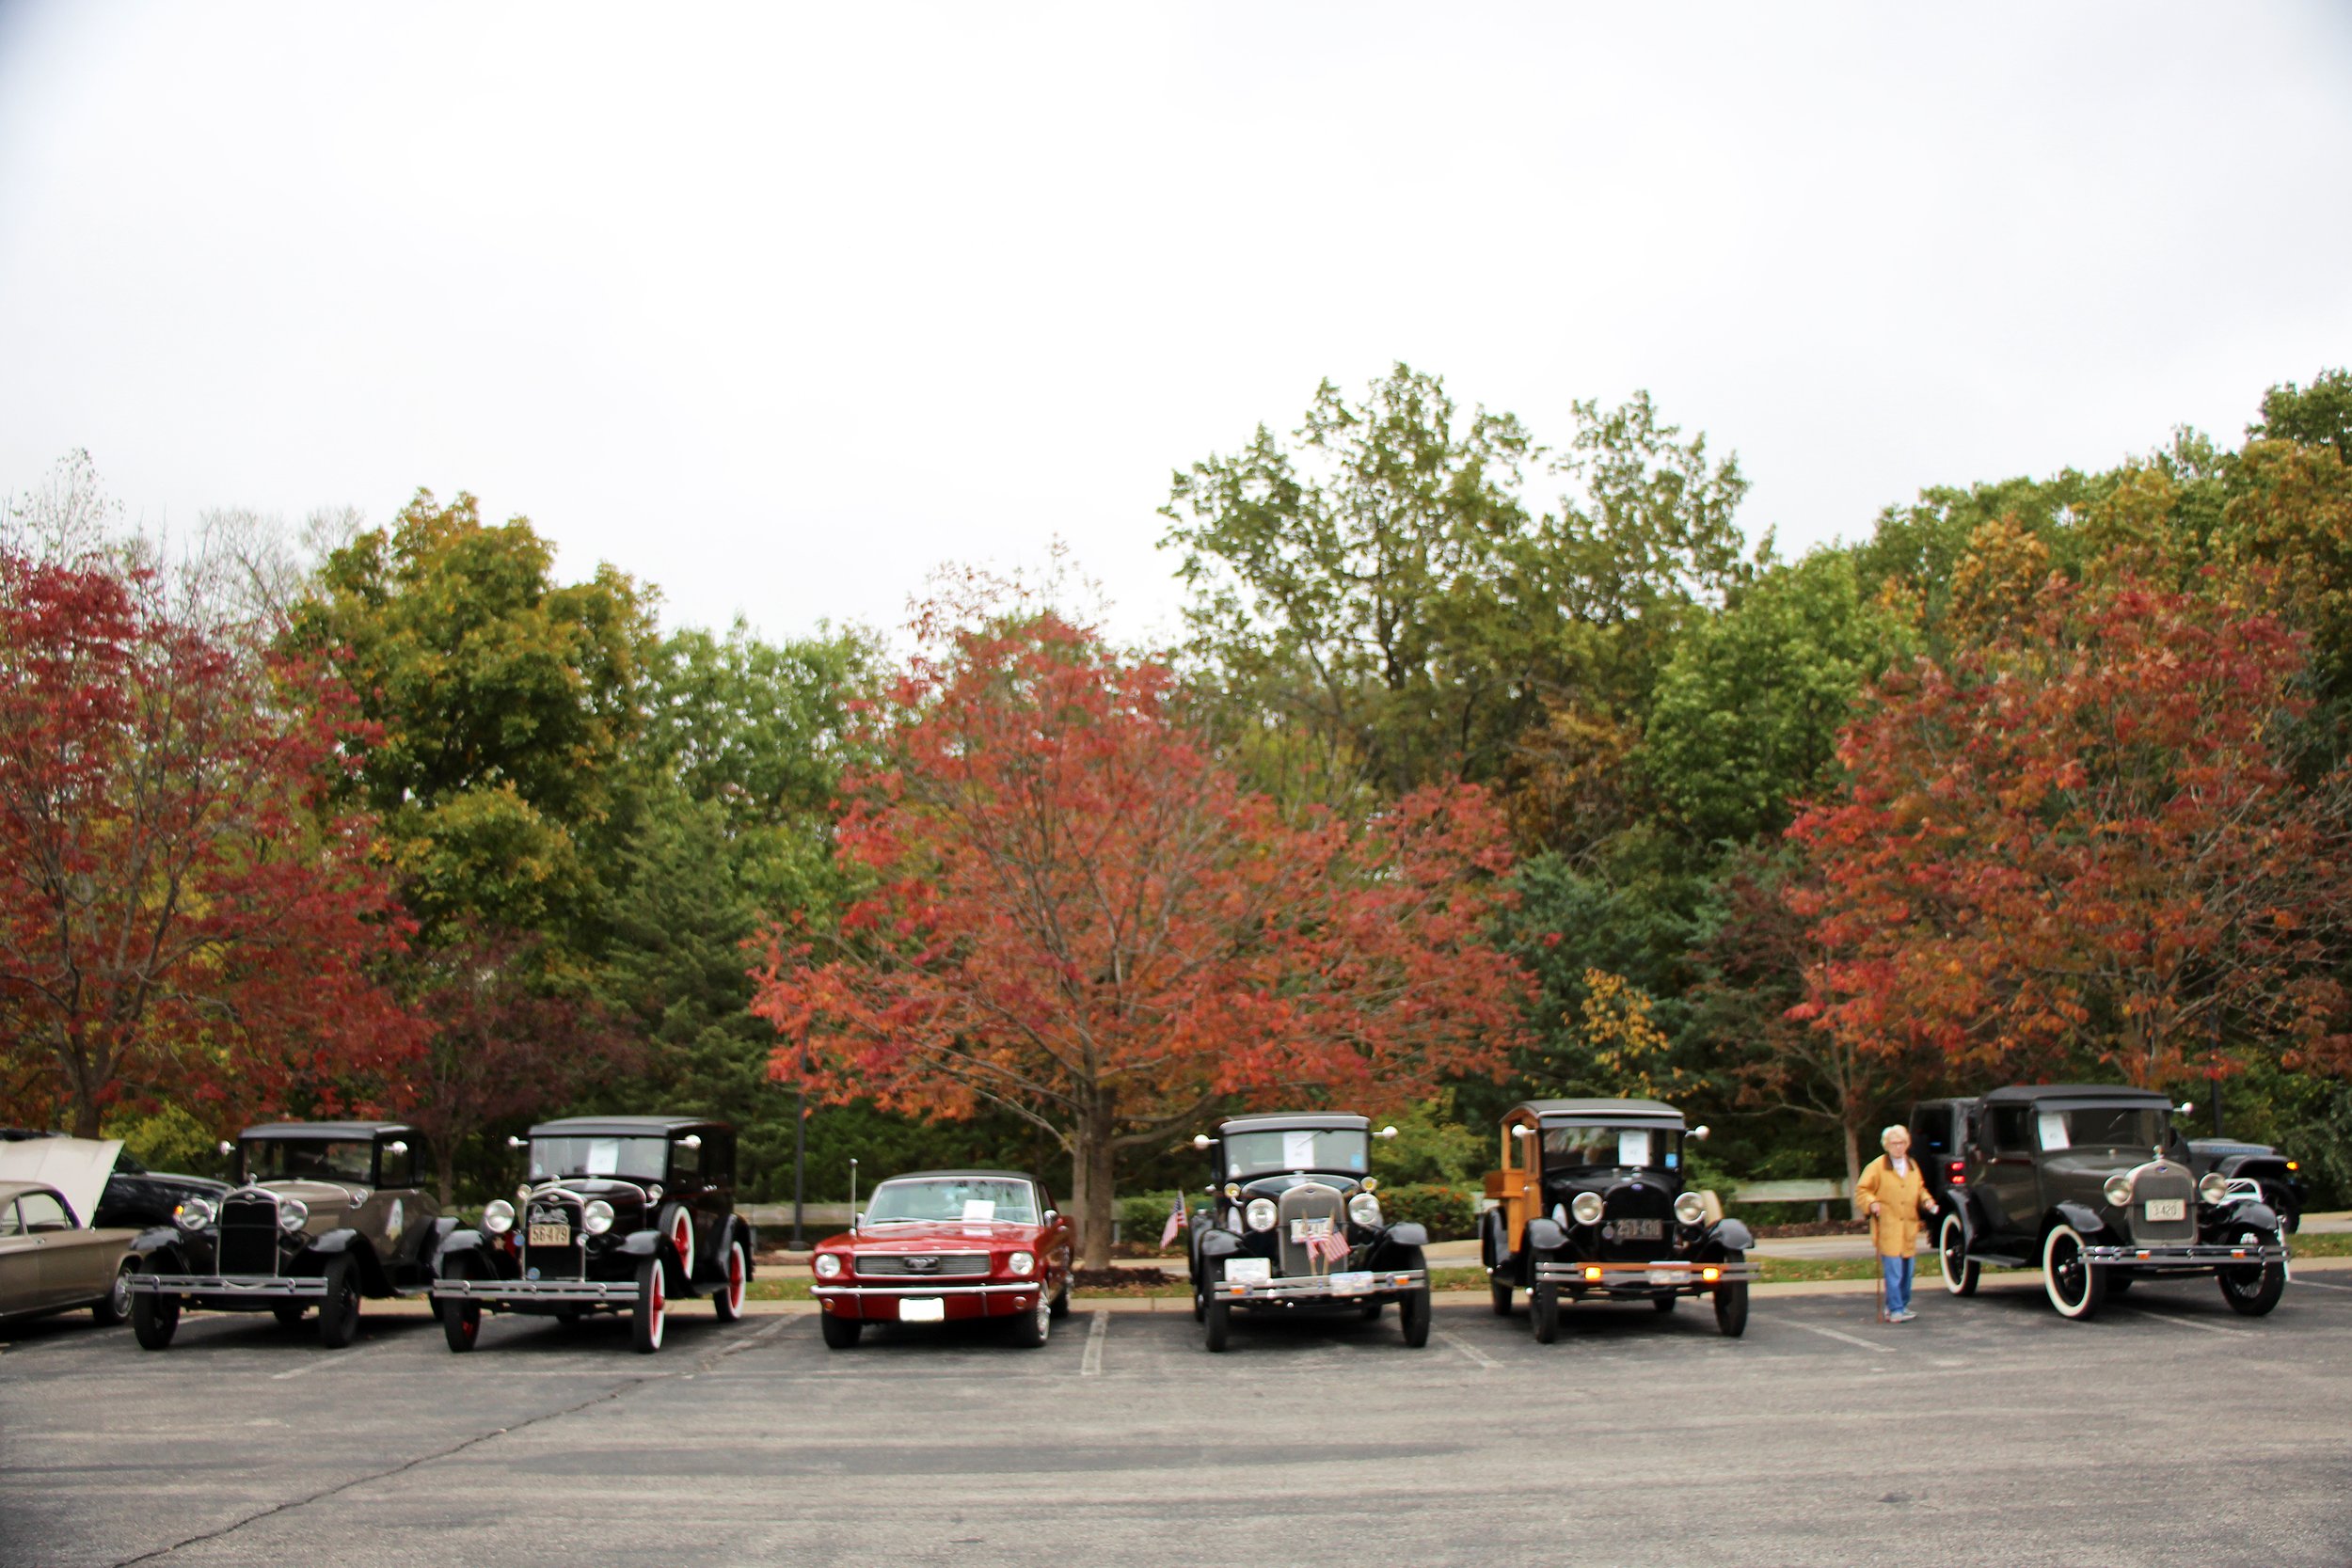    All 5 Model A's that were displayed (as seen from the front)   